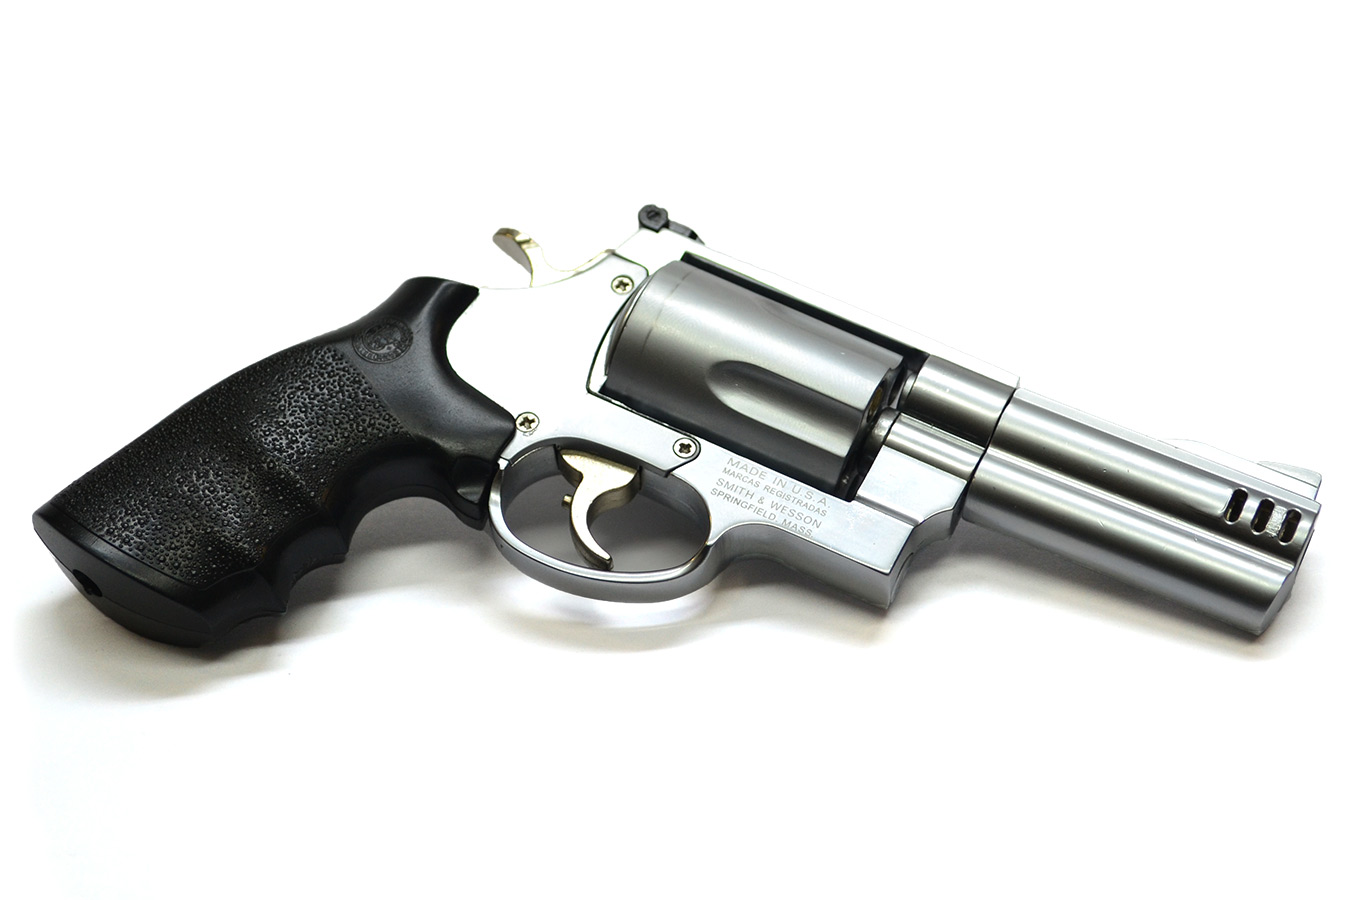 1/6 scale Revolver SMITH WESSON 500 steel magnum action figures 12"